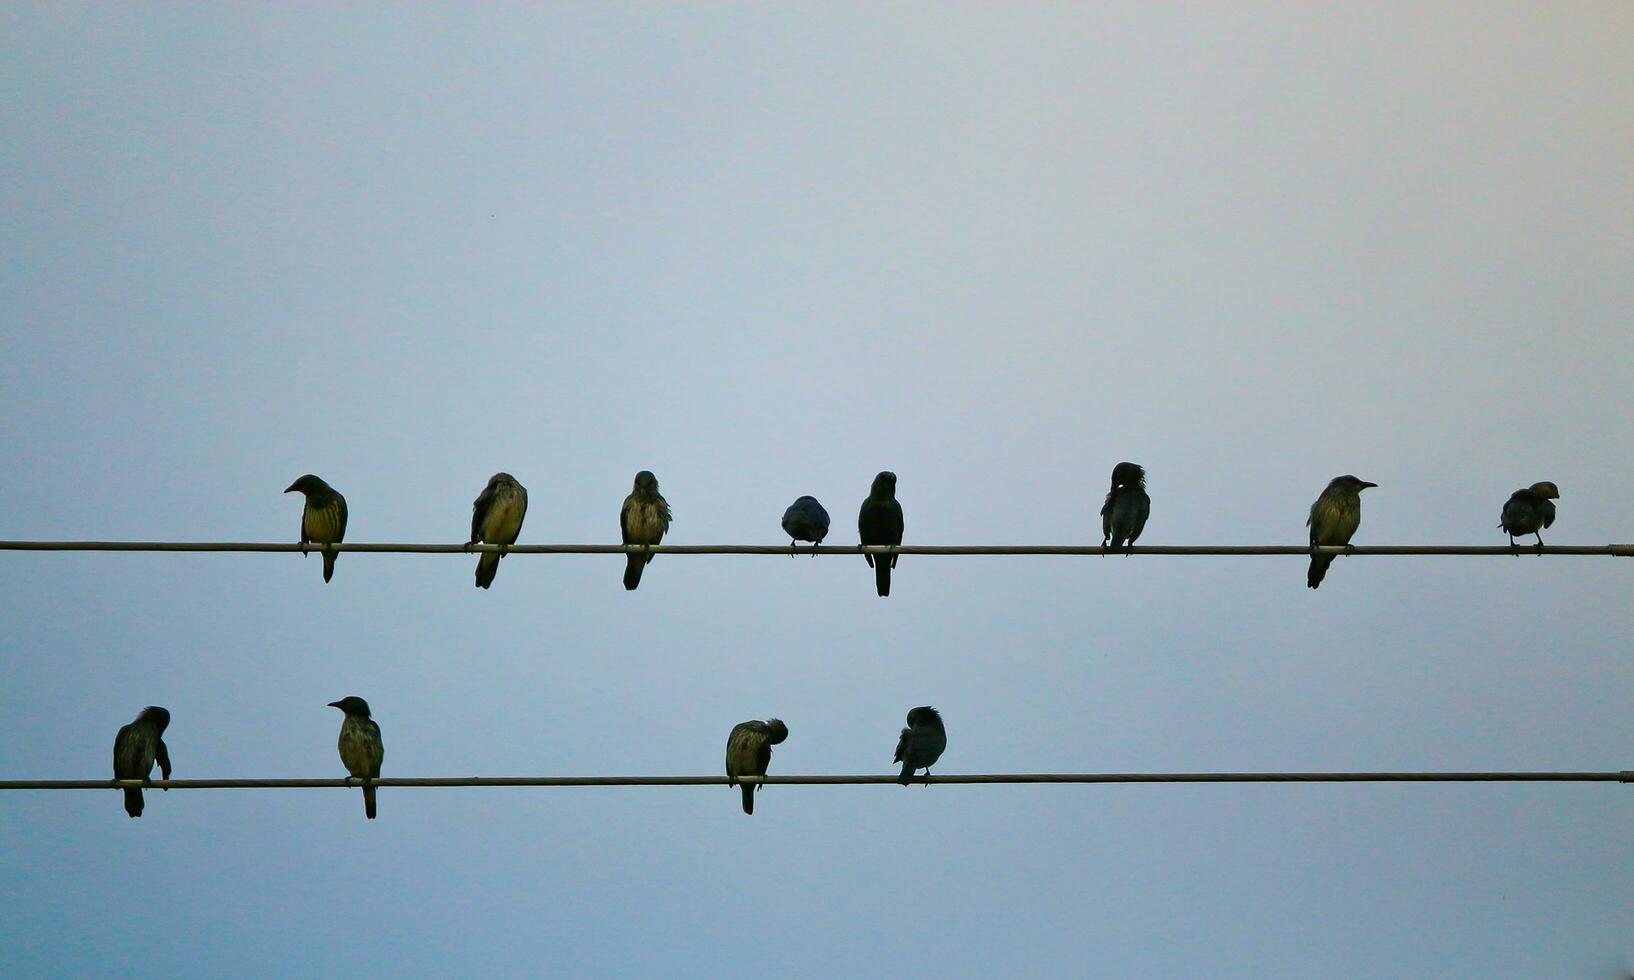 A group of sparrows is perched on a piece of electric cable against a blue sky photo